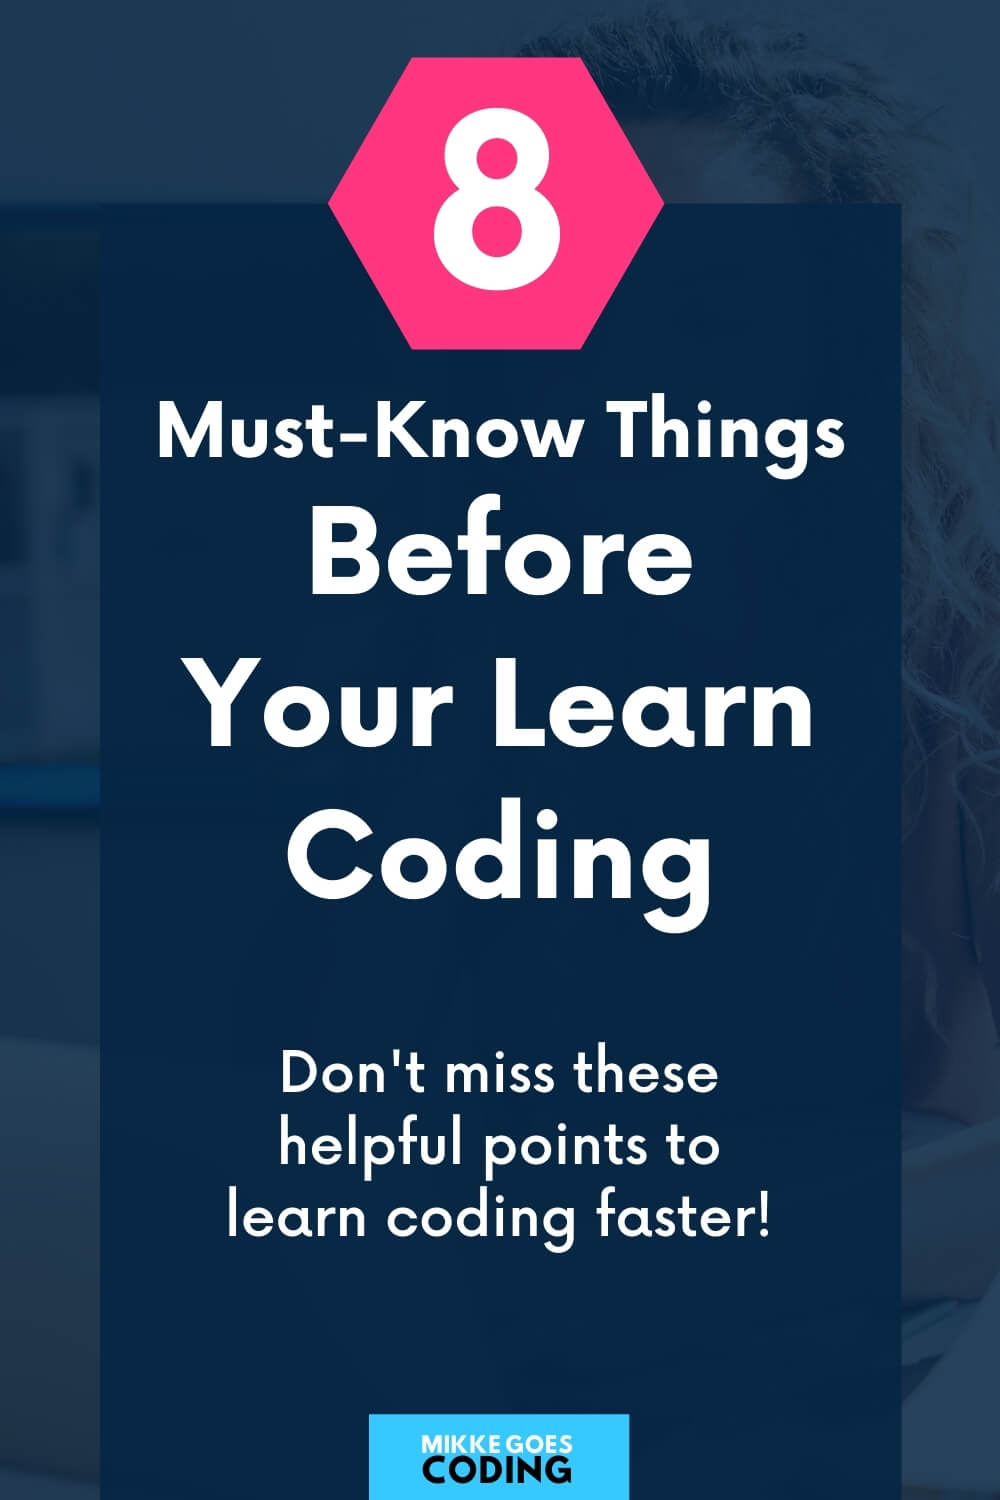 Thing you should know before learning to code 01